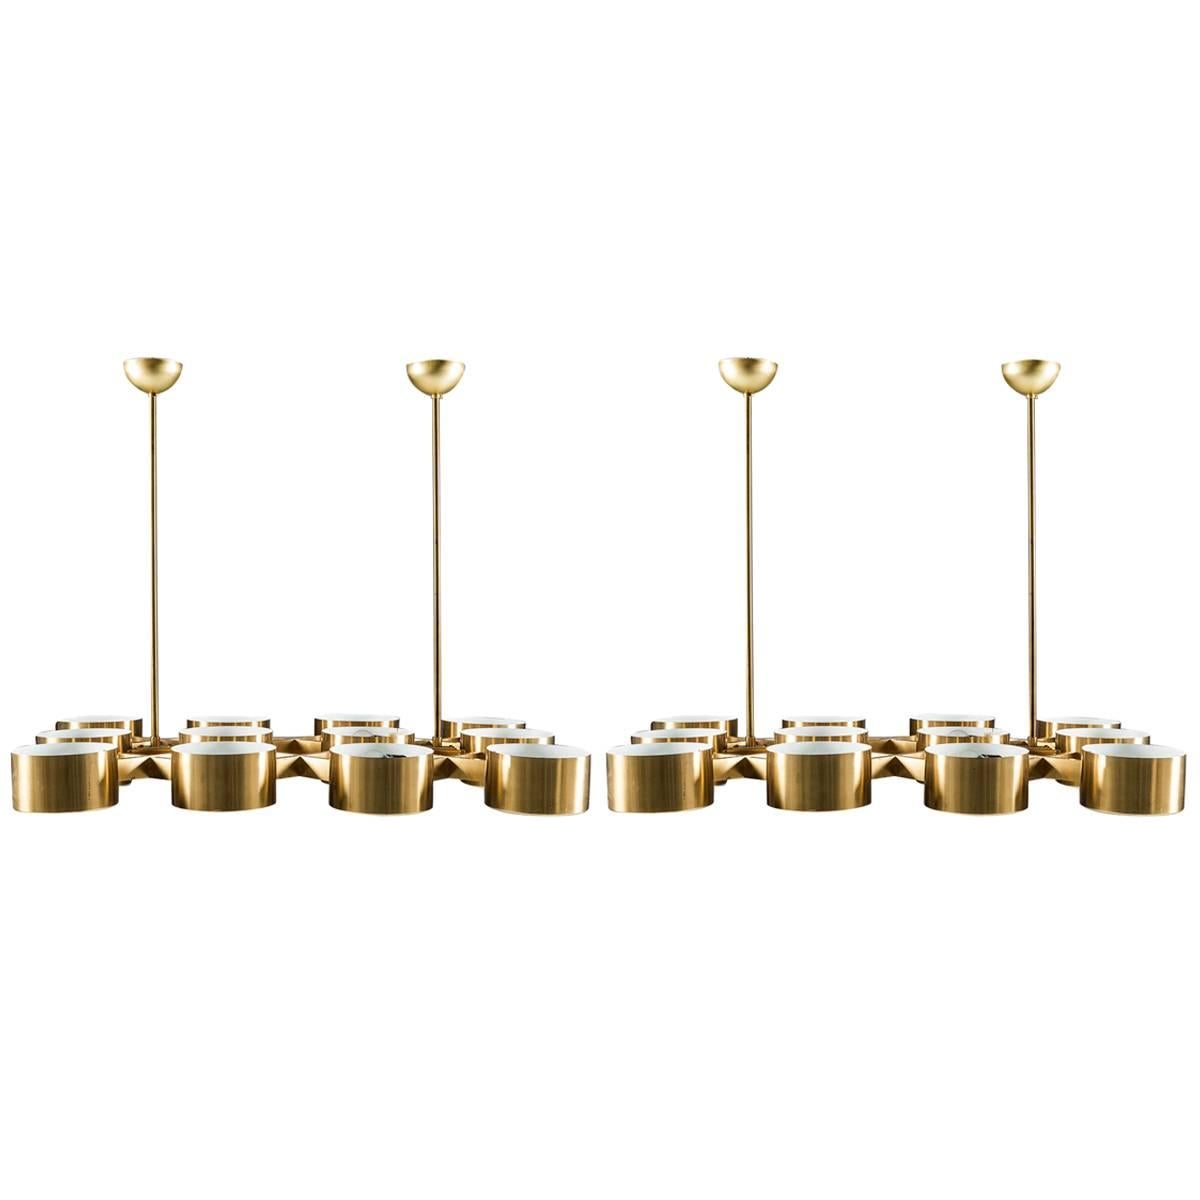 Pair of Large Swedish Chandeliers T363/12 in Brass by Hans-Agne Jakobsson